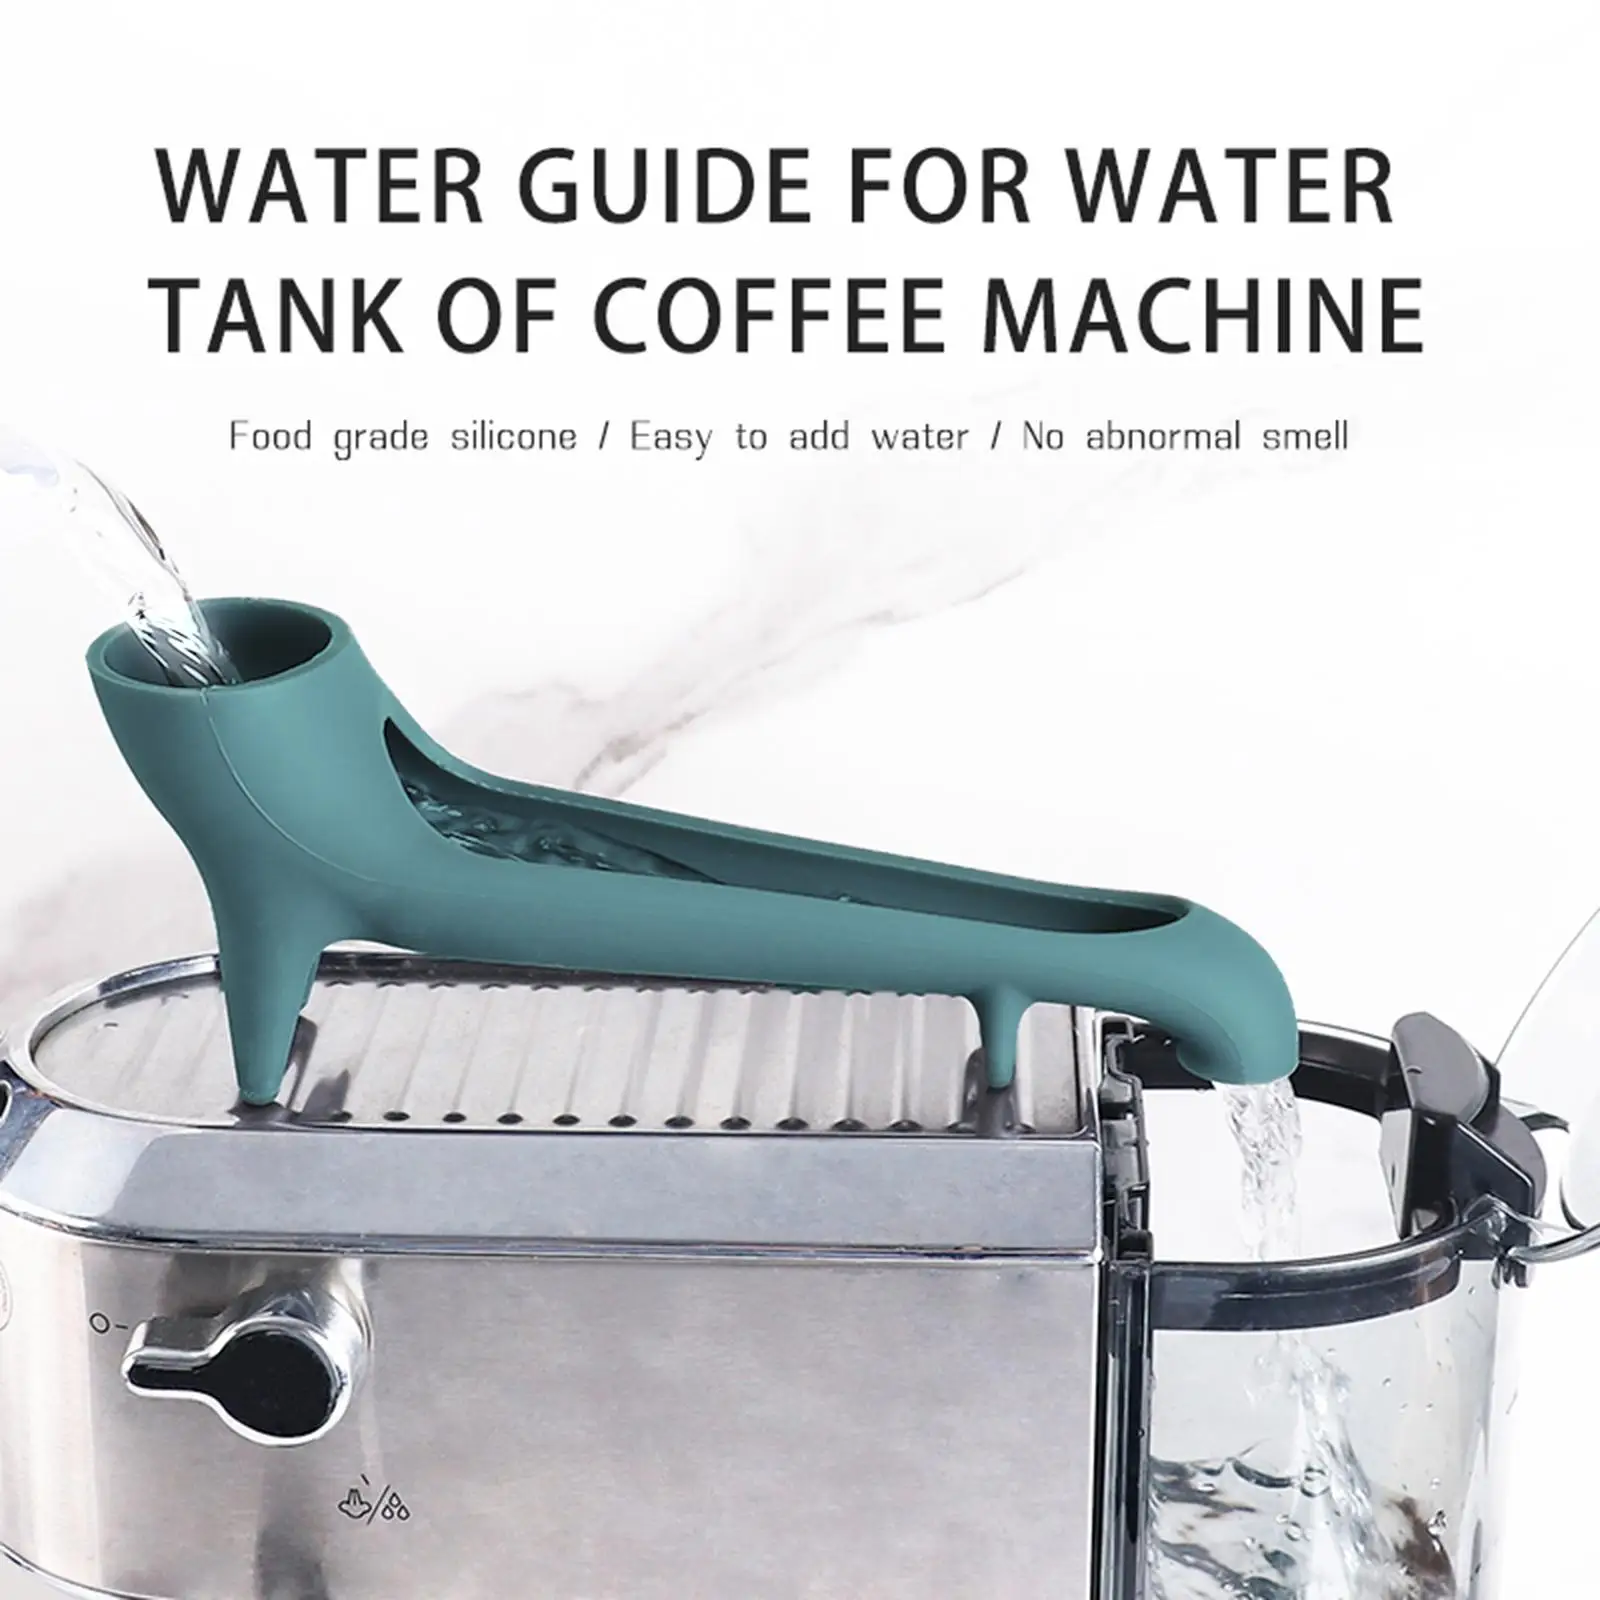 Coffee Machine Water Tank Water Guide Auxiliary Water Dispenser Diversion Tool Coffee Tampering and Water Tank